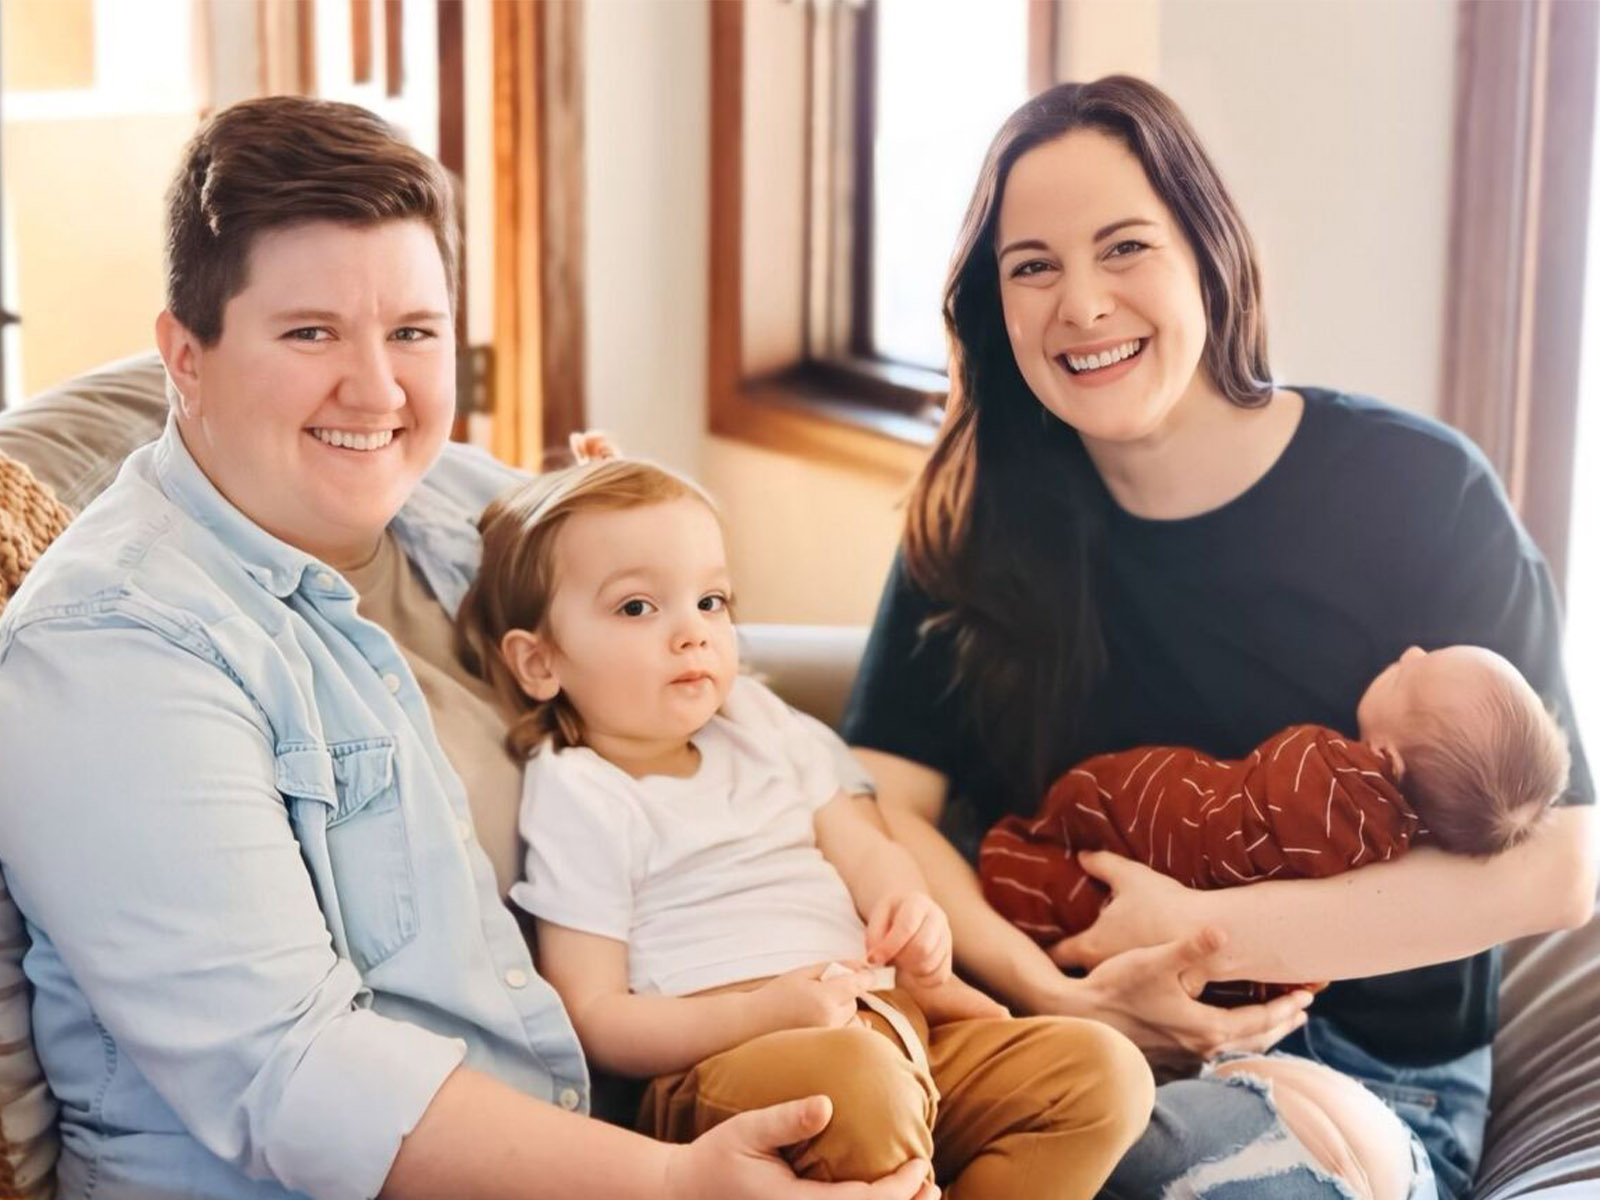 Molly Swanston (left) with her wife Alexa and their two children.